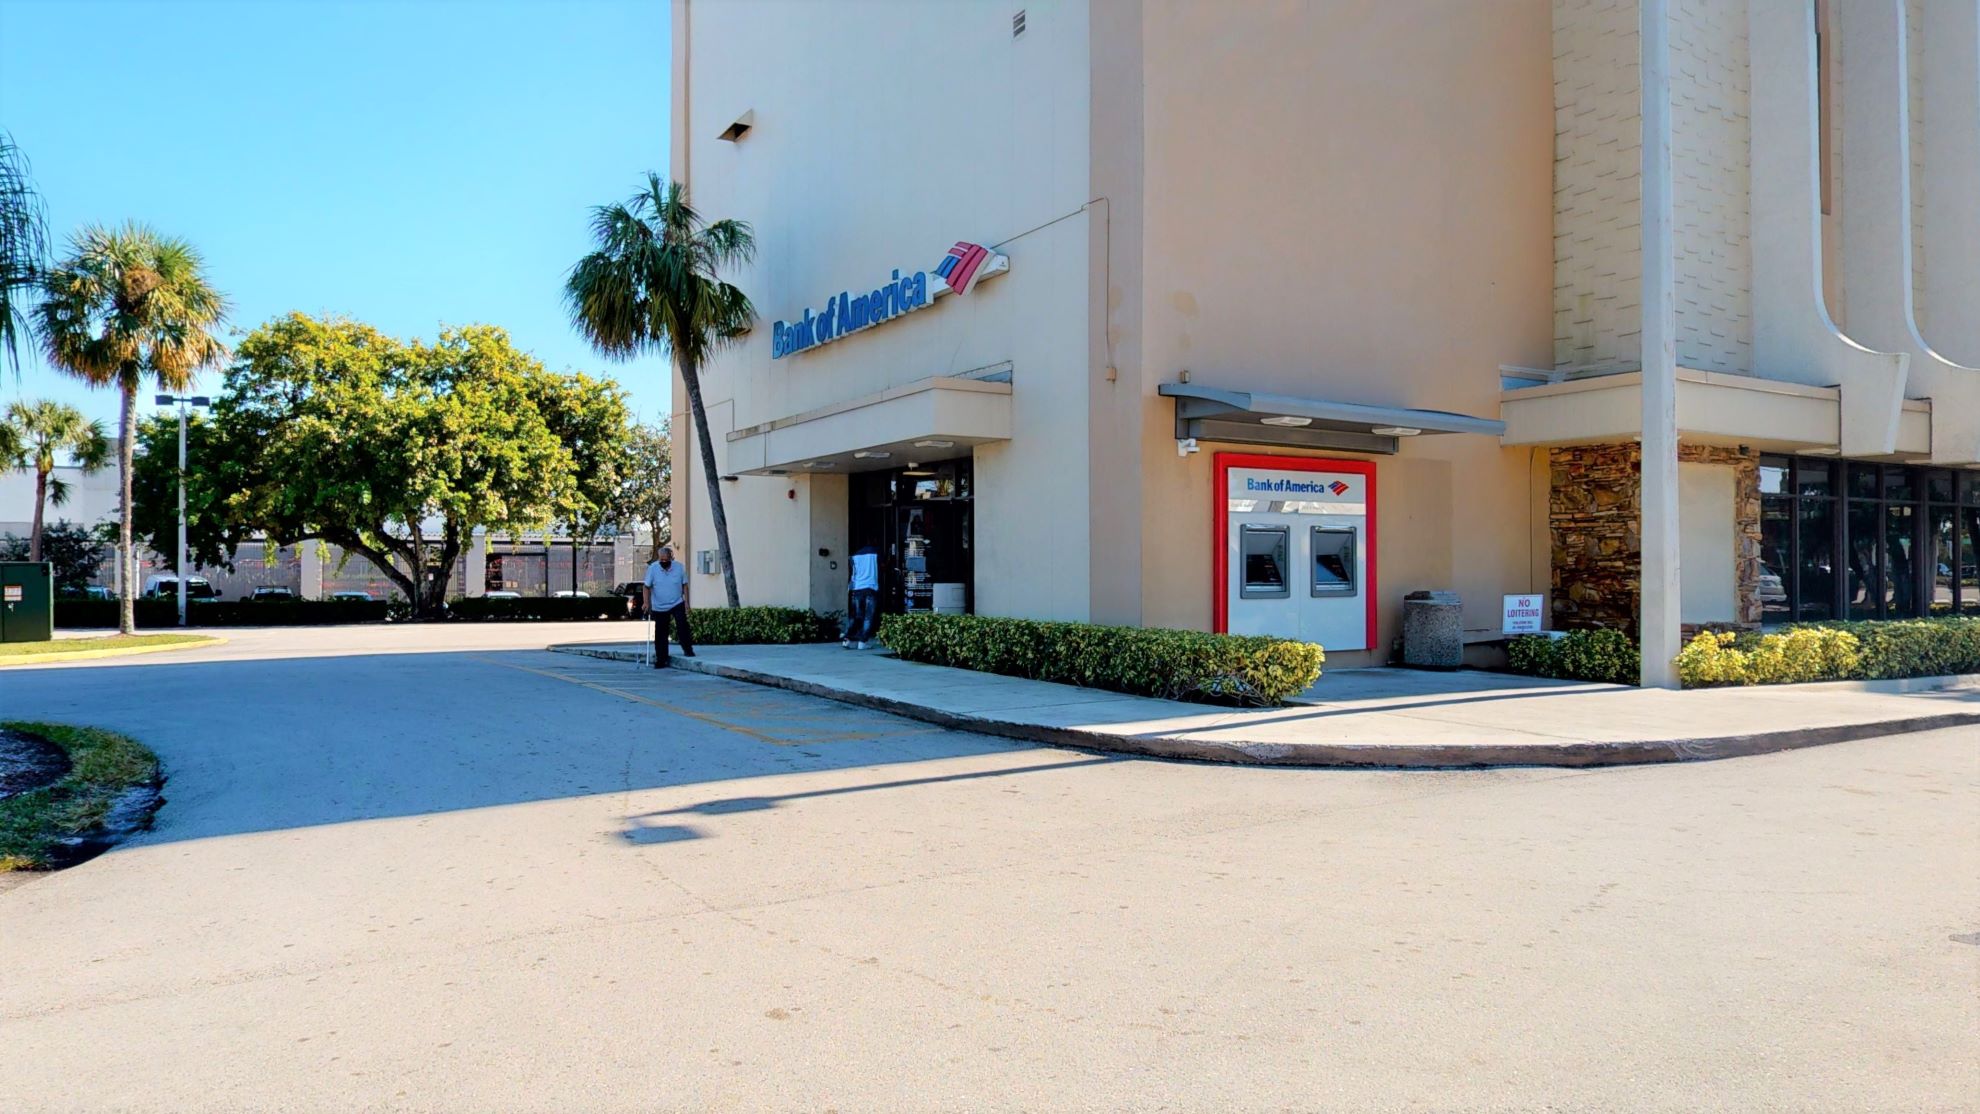 Bank of America financial center with drive-thru ATM | 550 Main Blvd, Margate, FL 33063